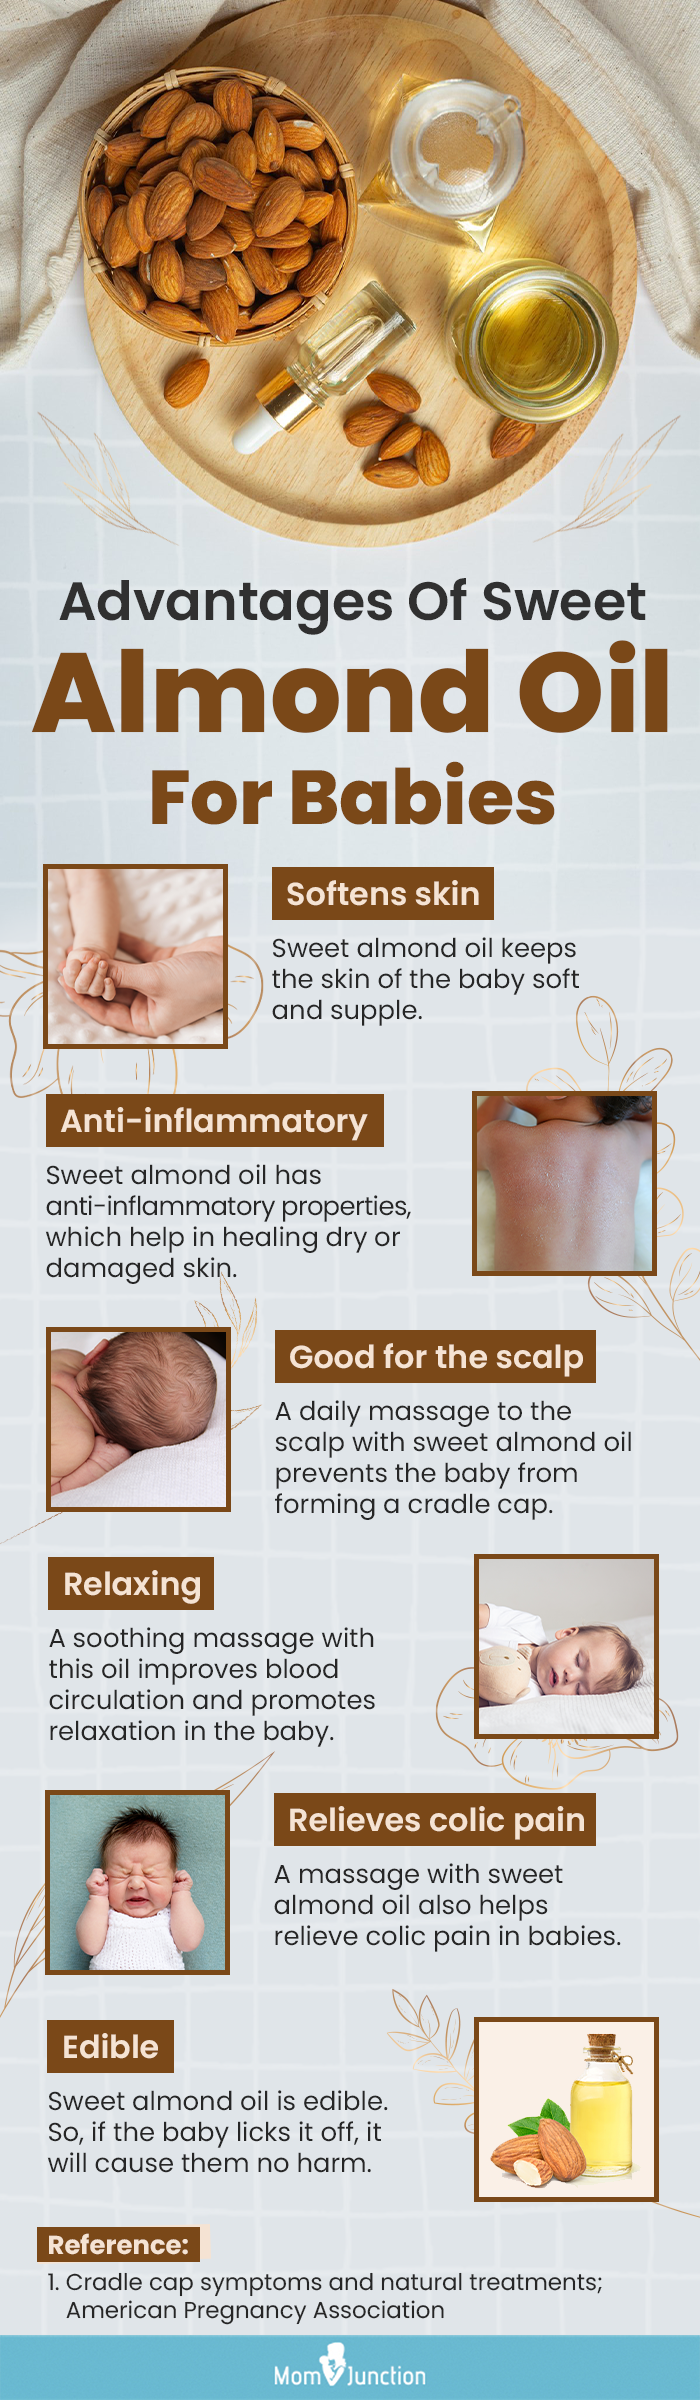 advantages of sweet almond oil for babies (infographic)